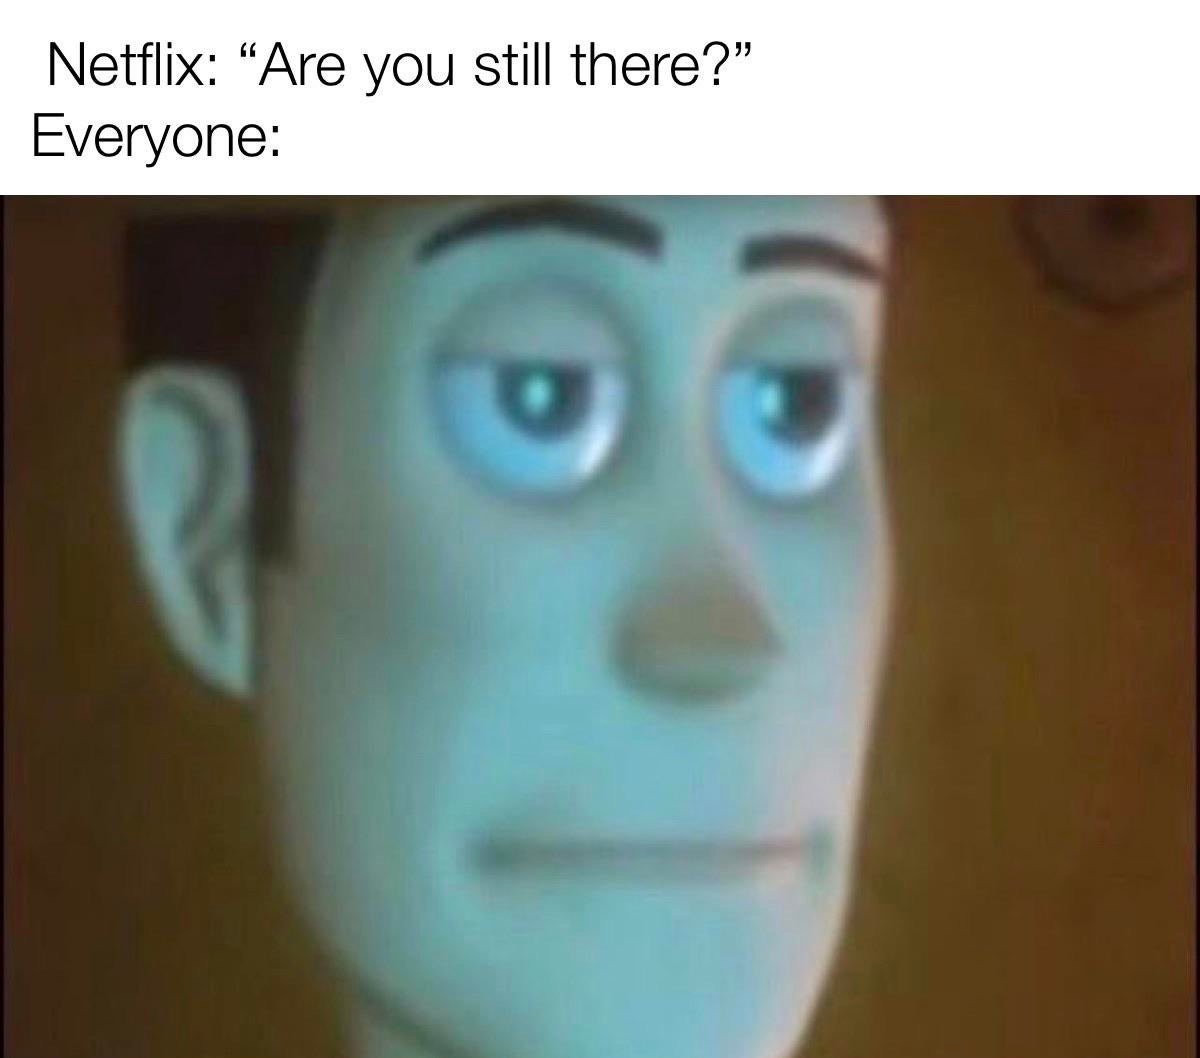 woody mfw - Netflix "Are you still there? Everyone